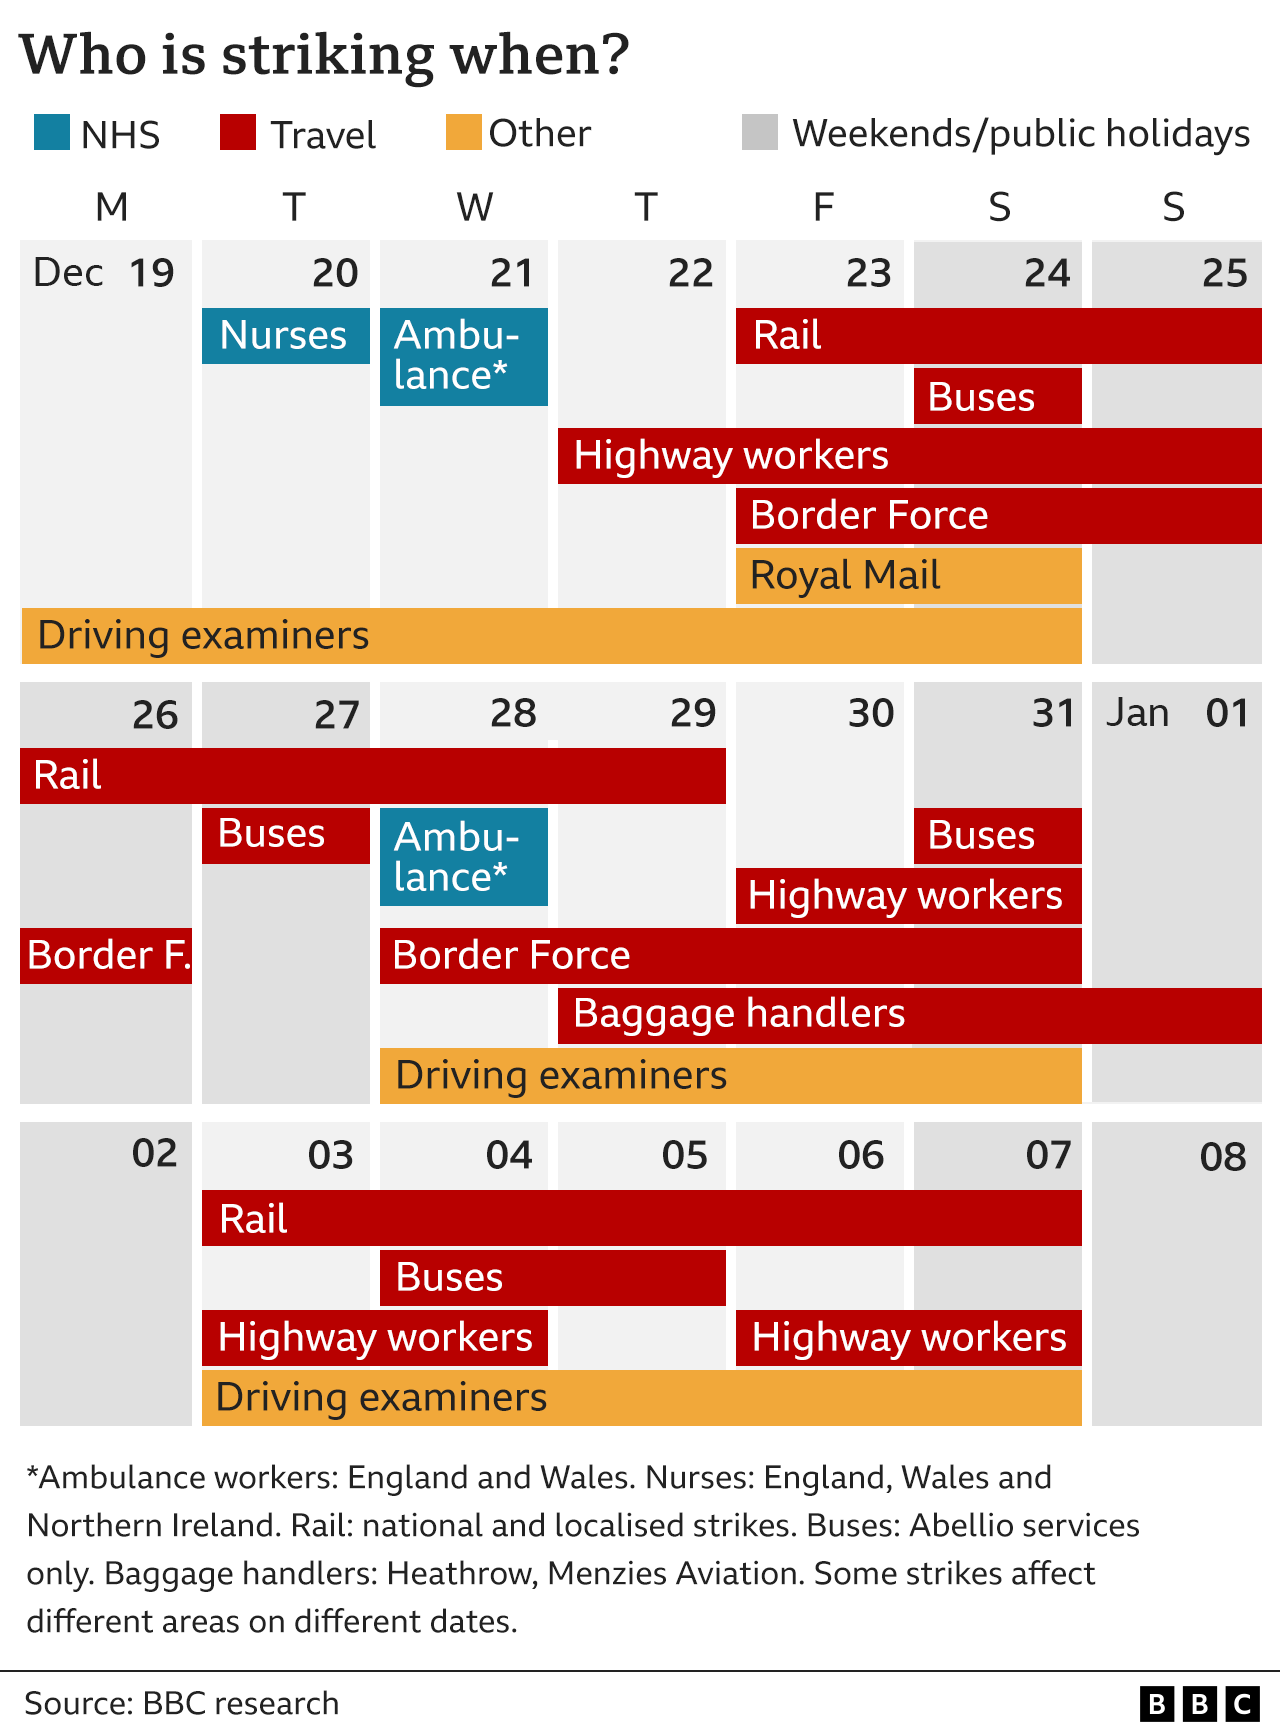 Graphic which shows those going on strike in the next month - they include ambulance workers in England and Wales, nurses, health workers in Northern Ireland, rail workers, Abellio buses, some Heathrow baggage handlers, highway workers, border force workers, driving examiners and Royal Mail.